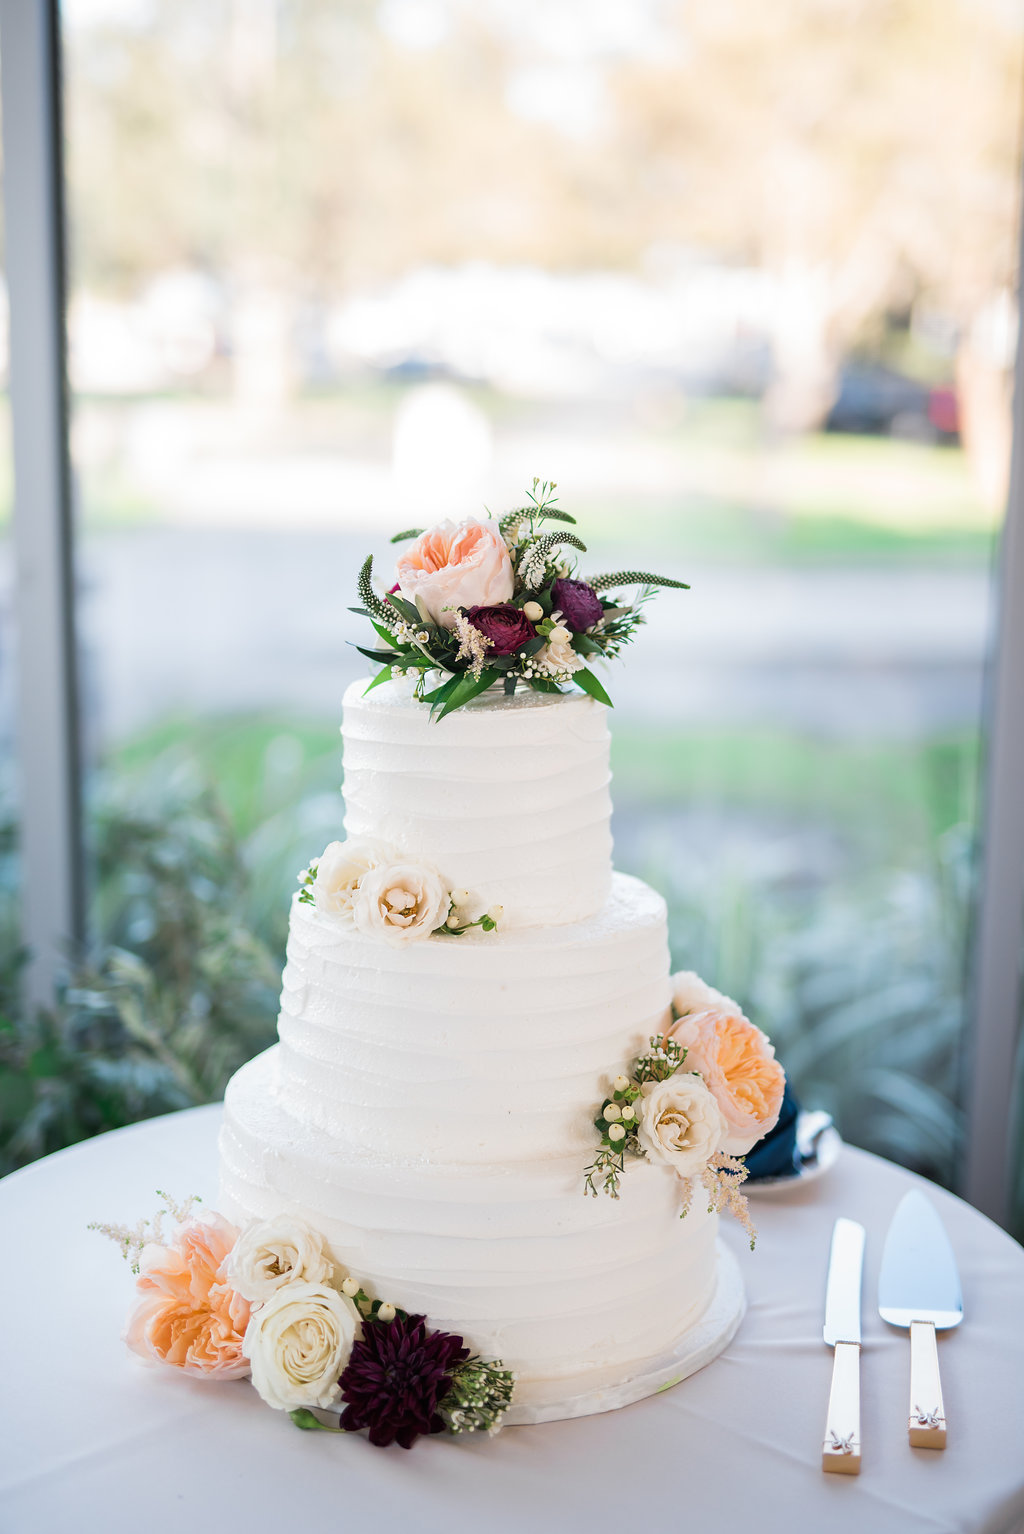 Three Tier Round White Wedding Cake with Ivory and Blush Roses, Burgundy Flowers and Greenery on Silver Plate with Floral Cake Topper | Naples Wedding Photographer Kera Photography | St. Pete Wedding Caterer Olympia Catering